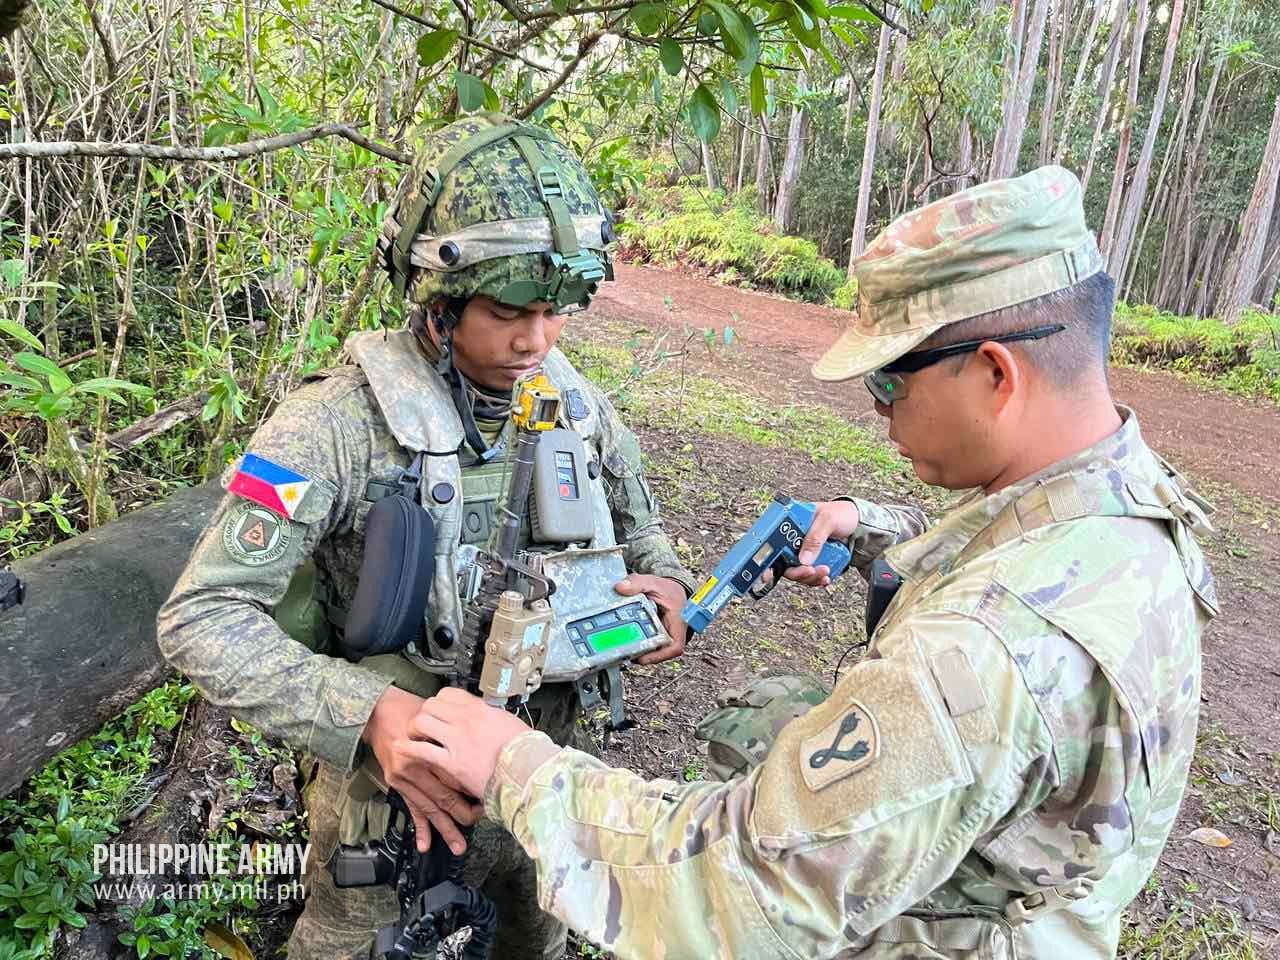 JPMRC exercise between the Philippines and the United States